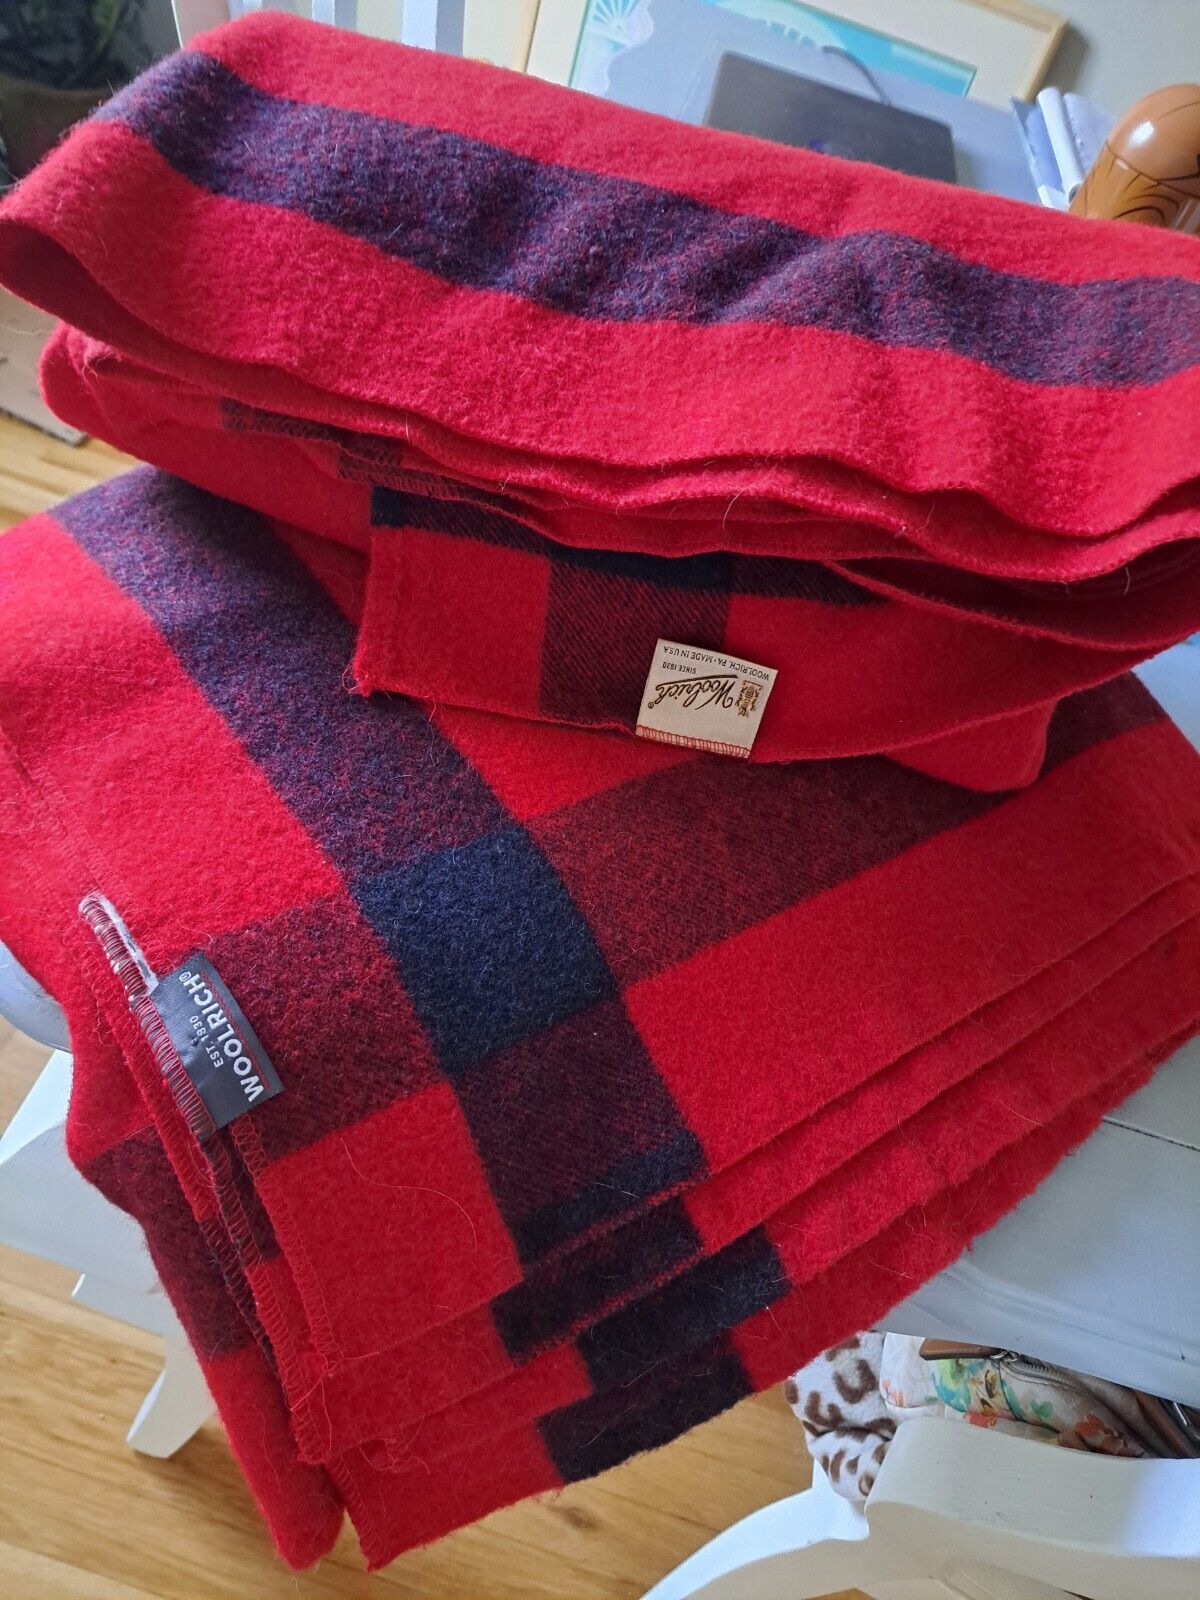 Woolrich  Red & Black 100% Wool Blankets Fits Full Bed Made In Penna. 76\